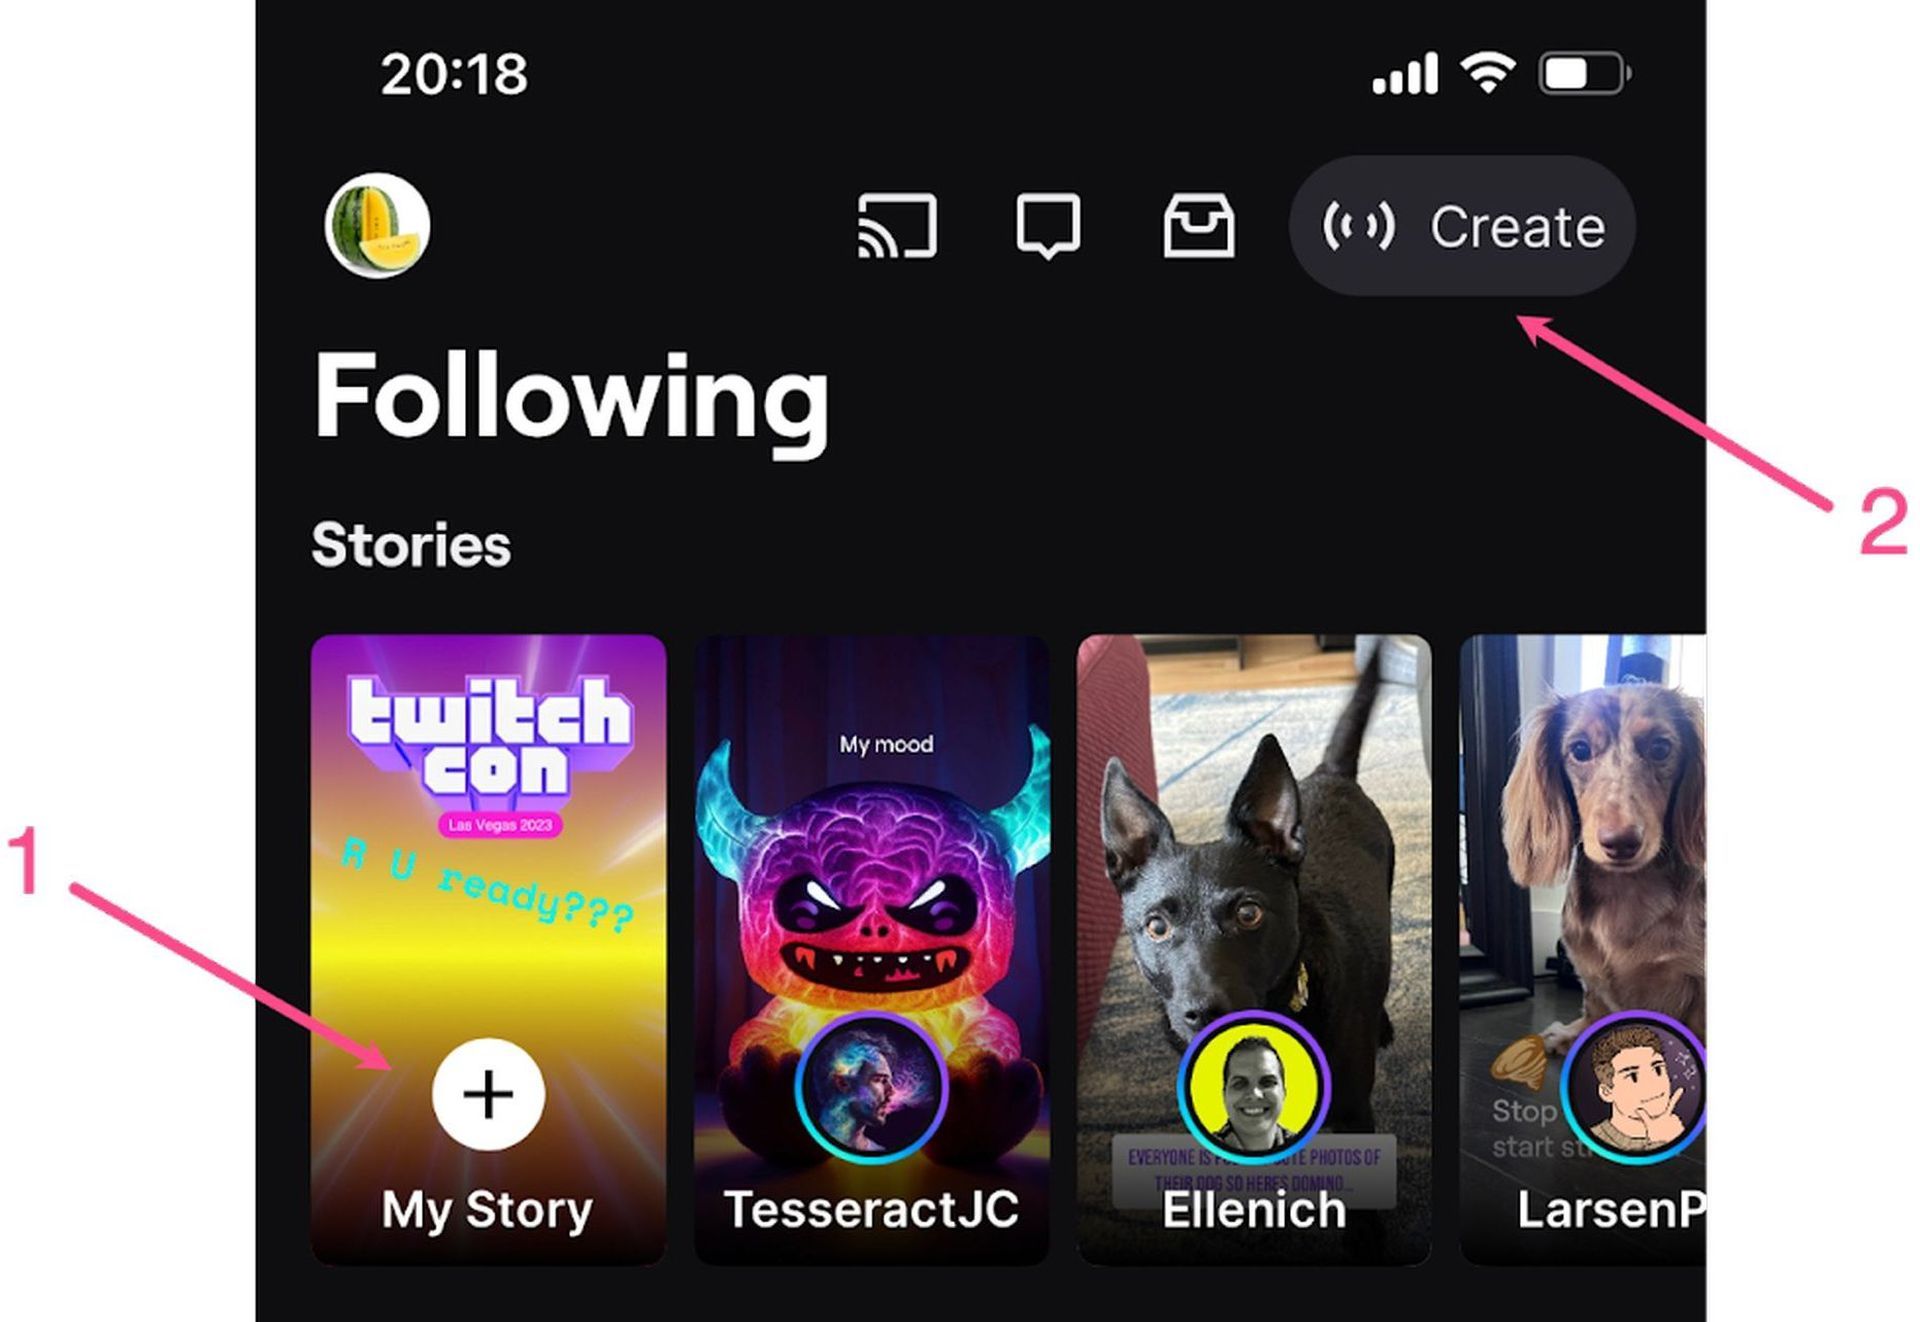 How to create Twitch Stories